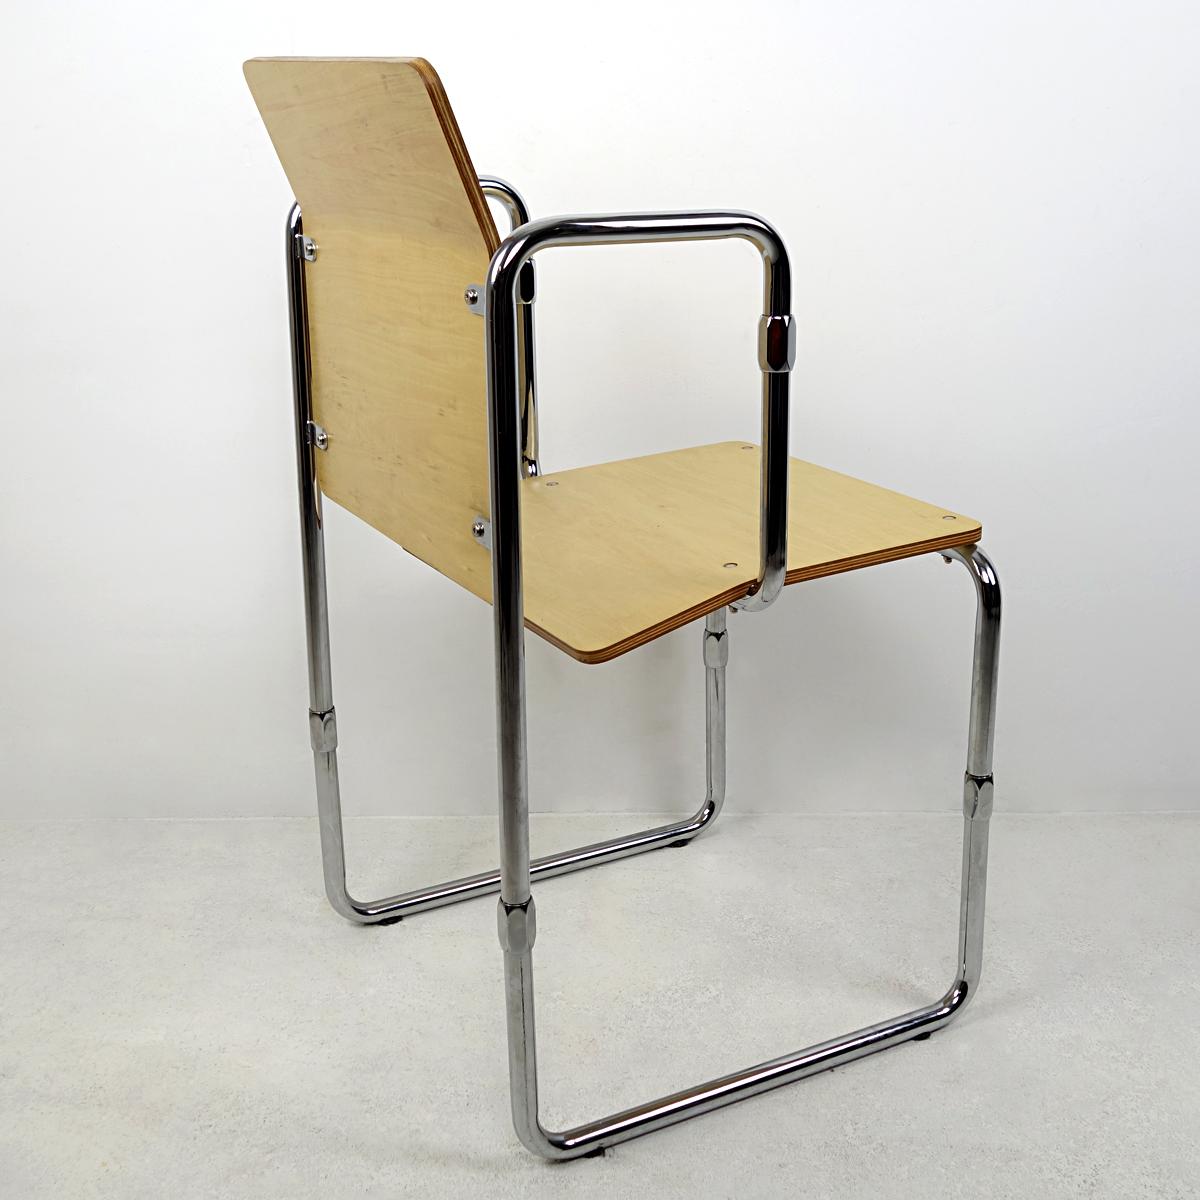 20th Century Modernist Hopmi Chair by Gerrit Rietveld Limited Edition Official Reproduction